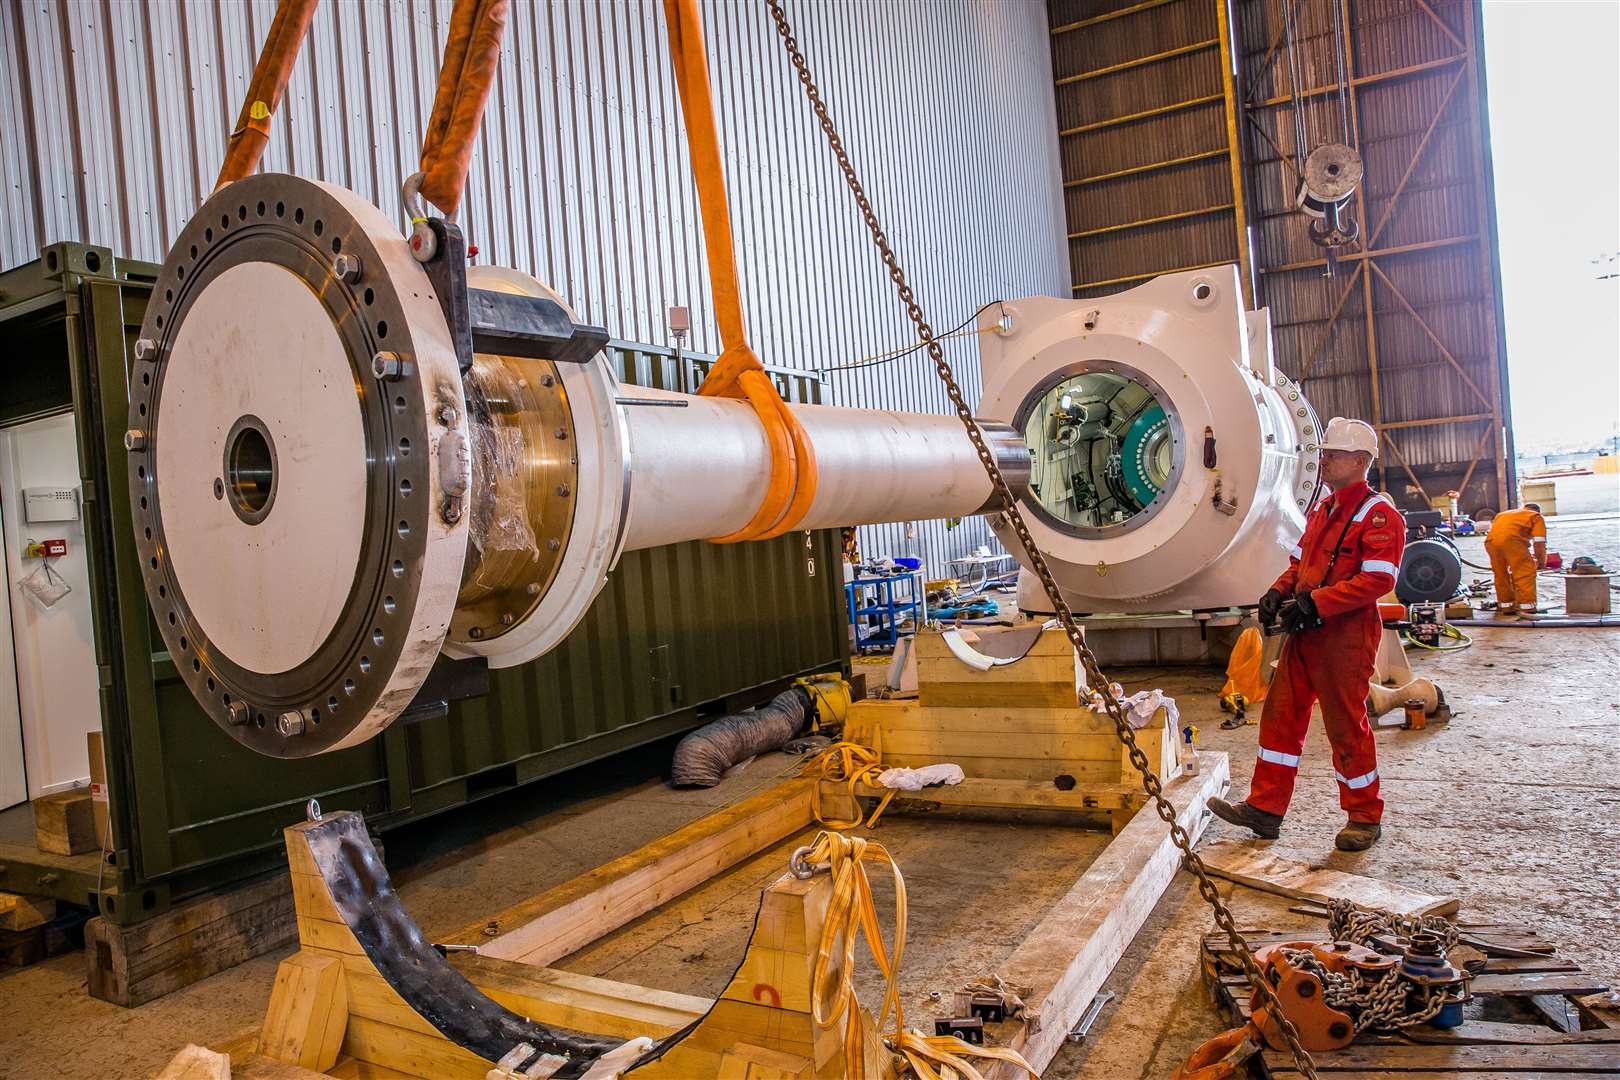 Simec Atlantis made a profit of £4.5m in the first half of the year, as it steps up development of its MeyGen site in the Pentland Firth.